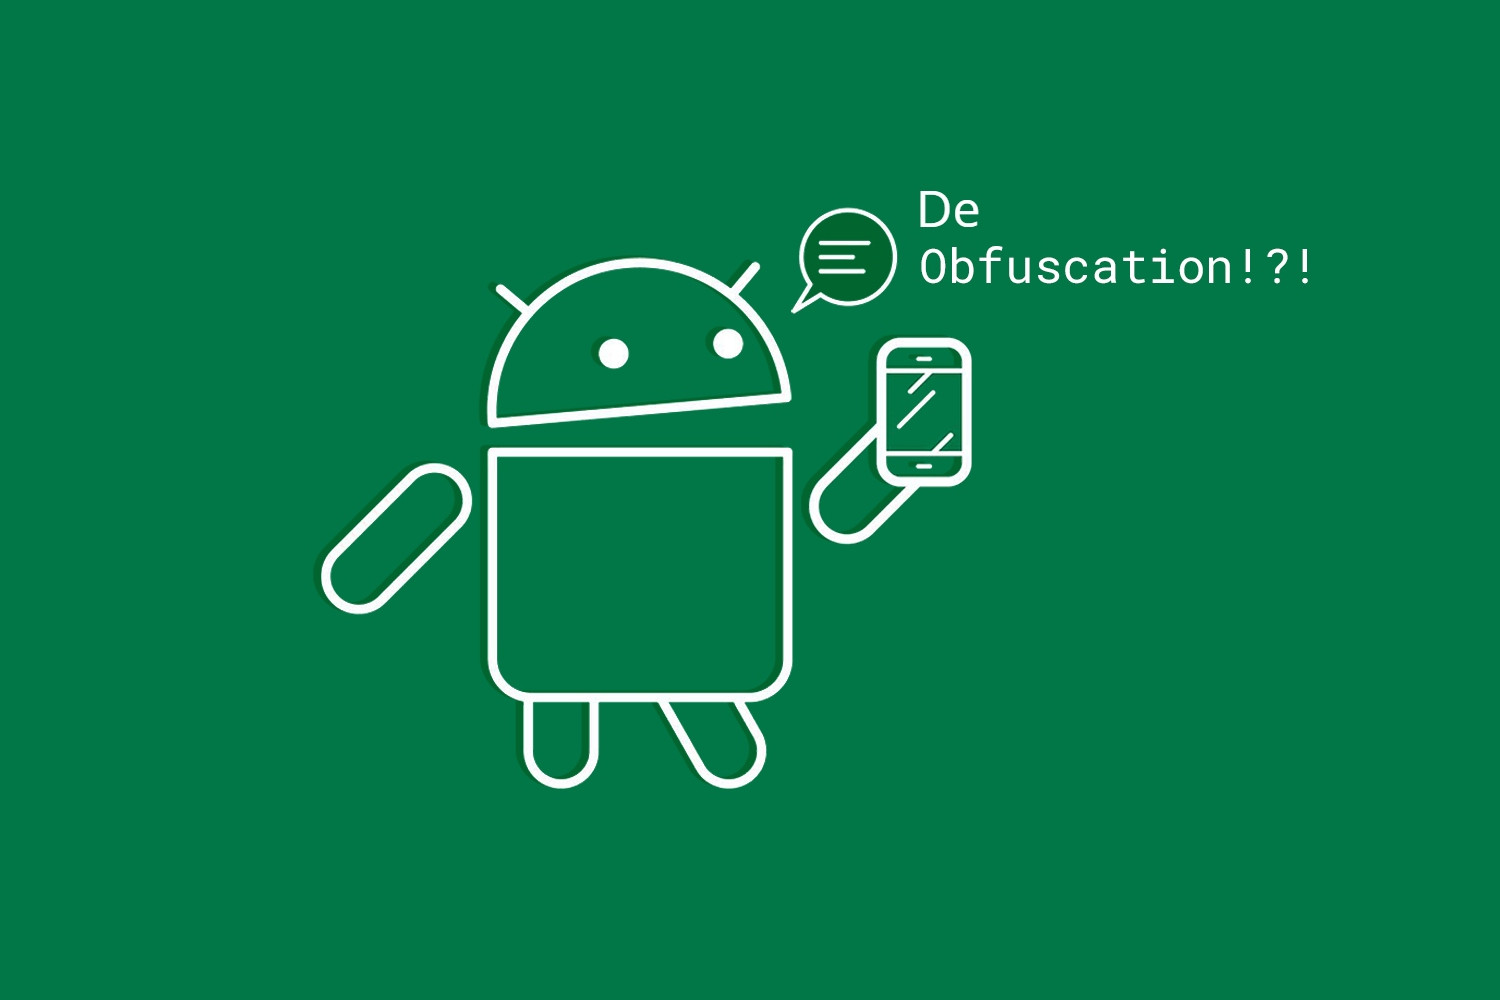 How to deobfuscate an Android stacktrace using mapping file ?